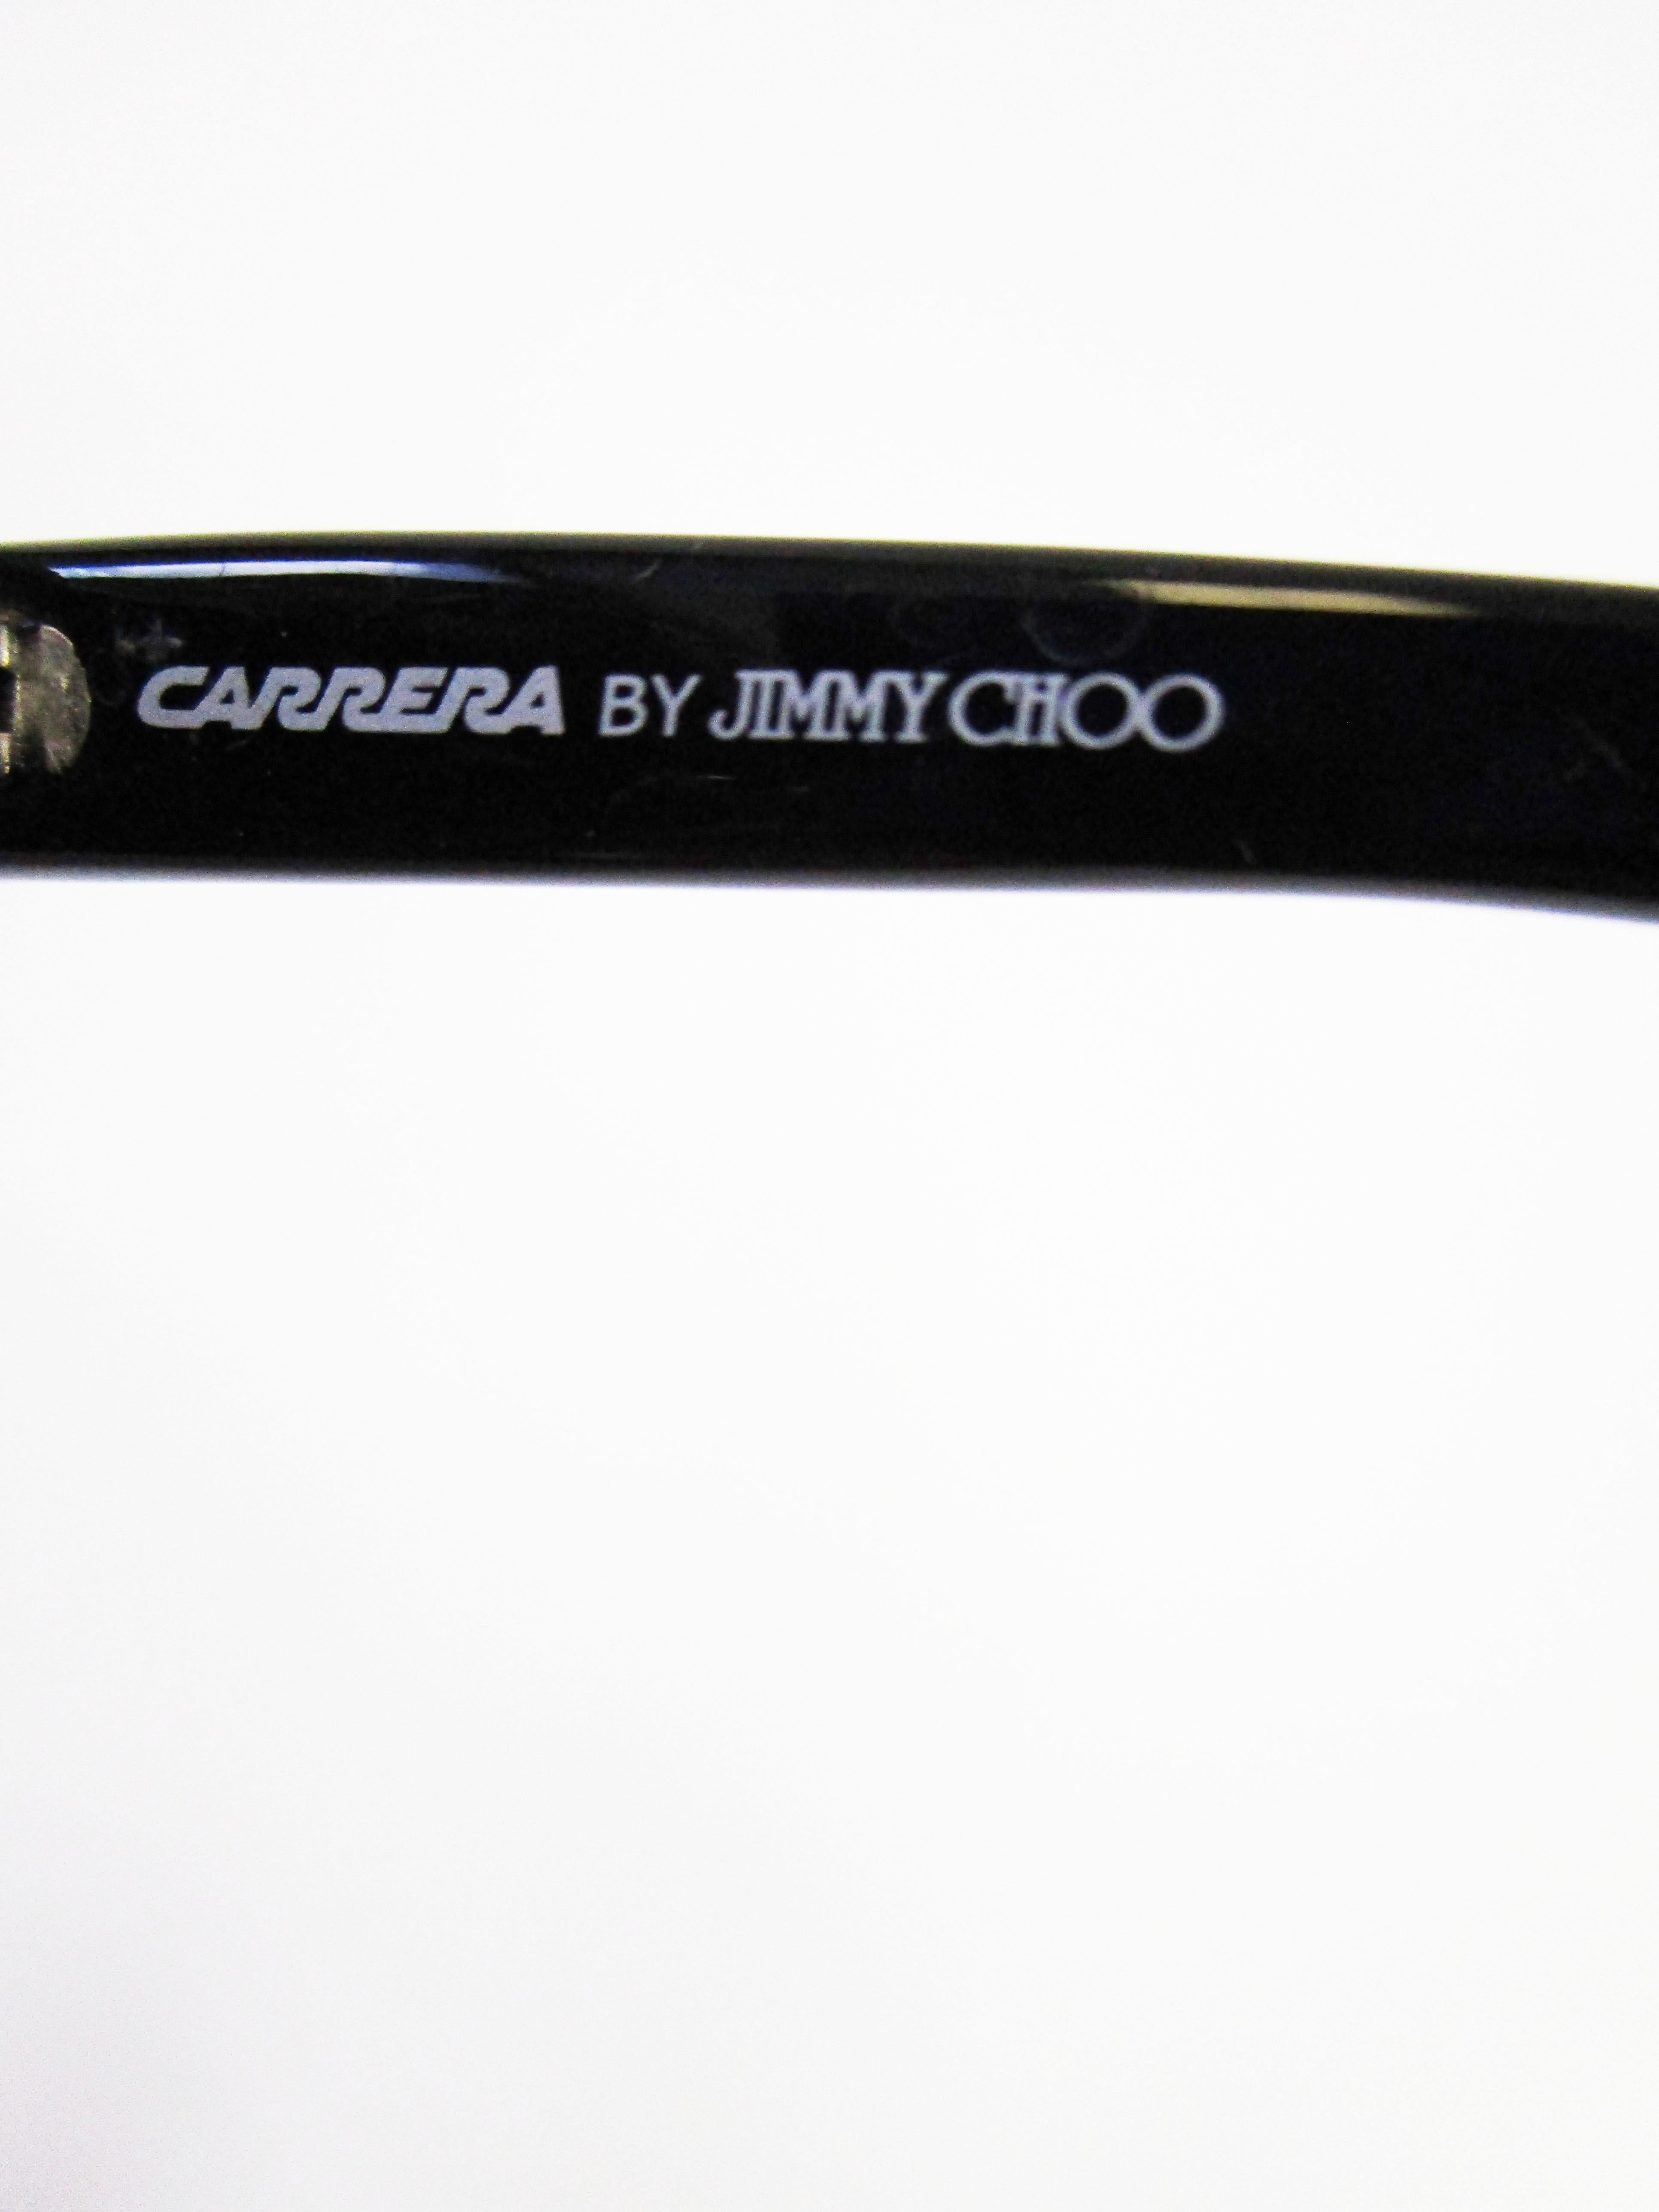 Jimmy Choo for Carrera Black Sparkled Framed Optyl Sunglasses In Excellent Condition For Sale In Houston, TX